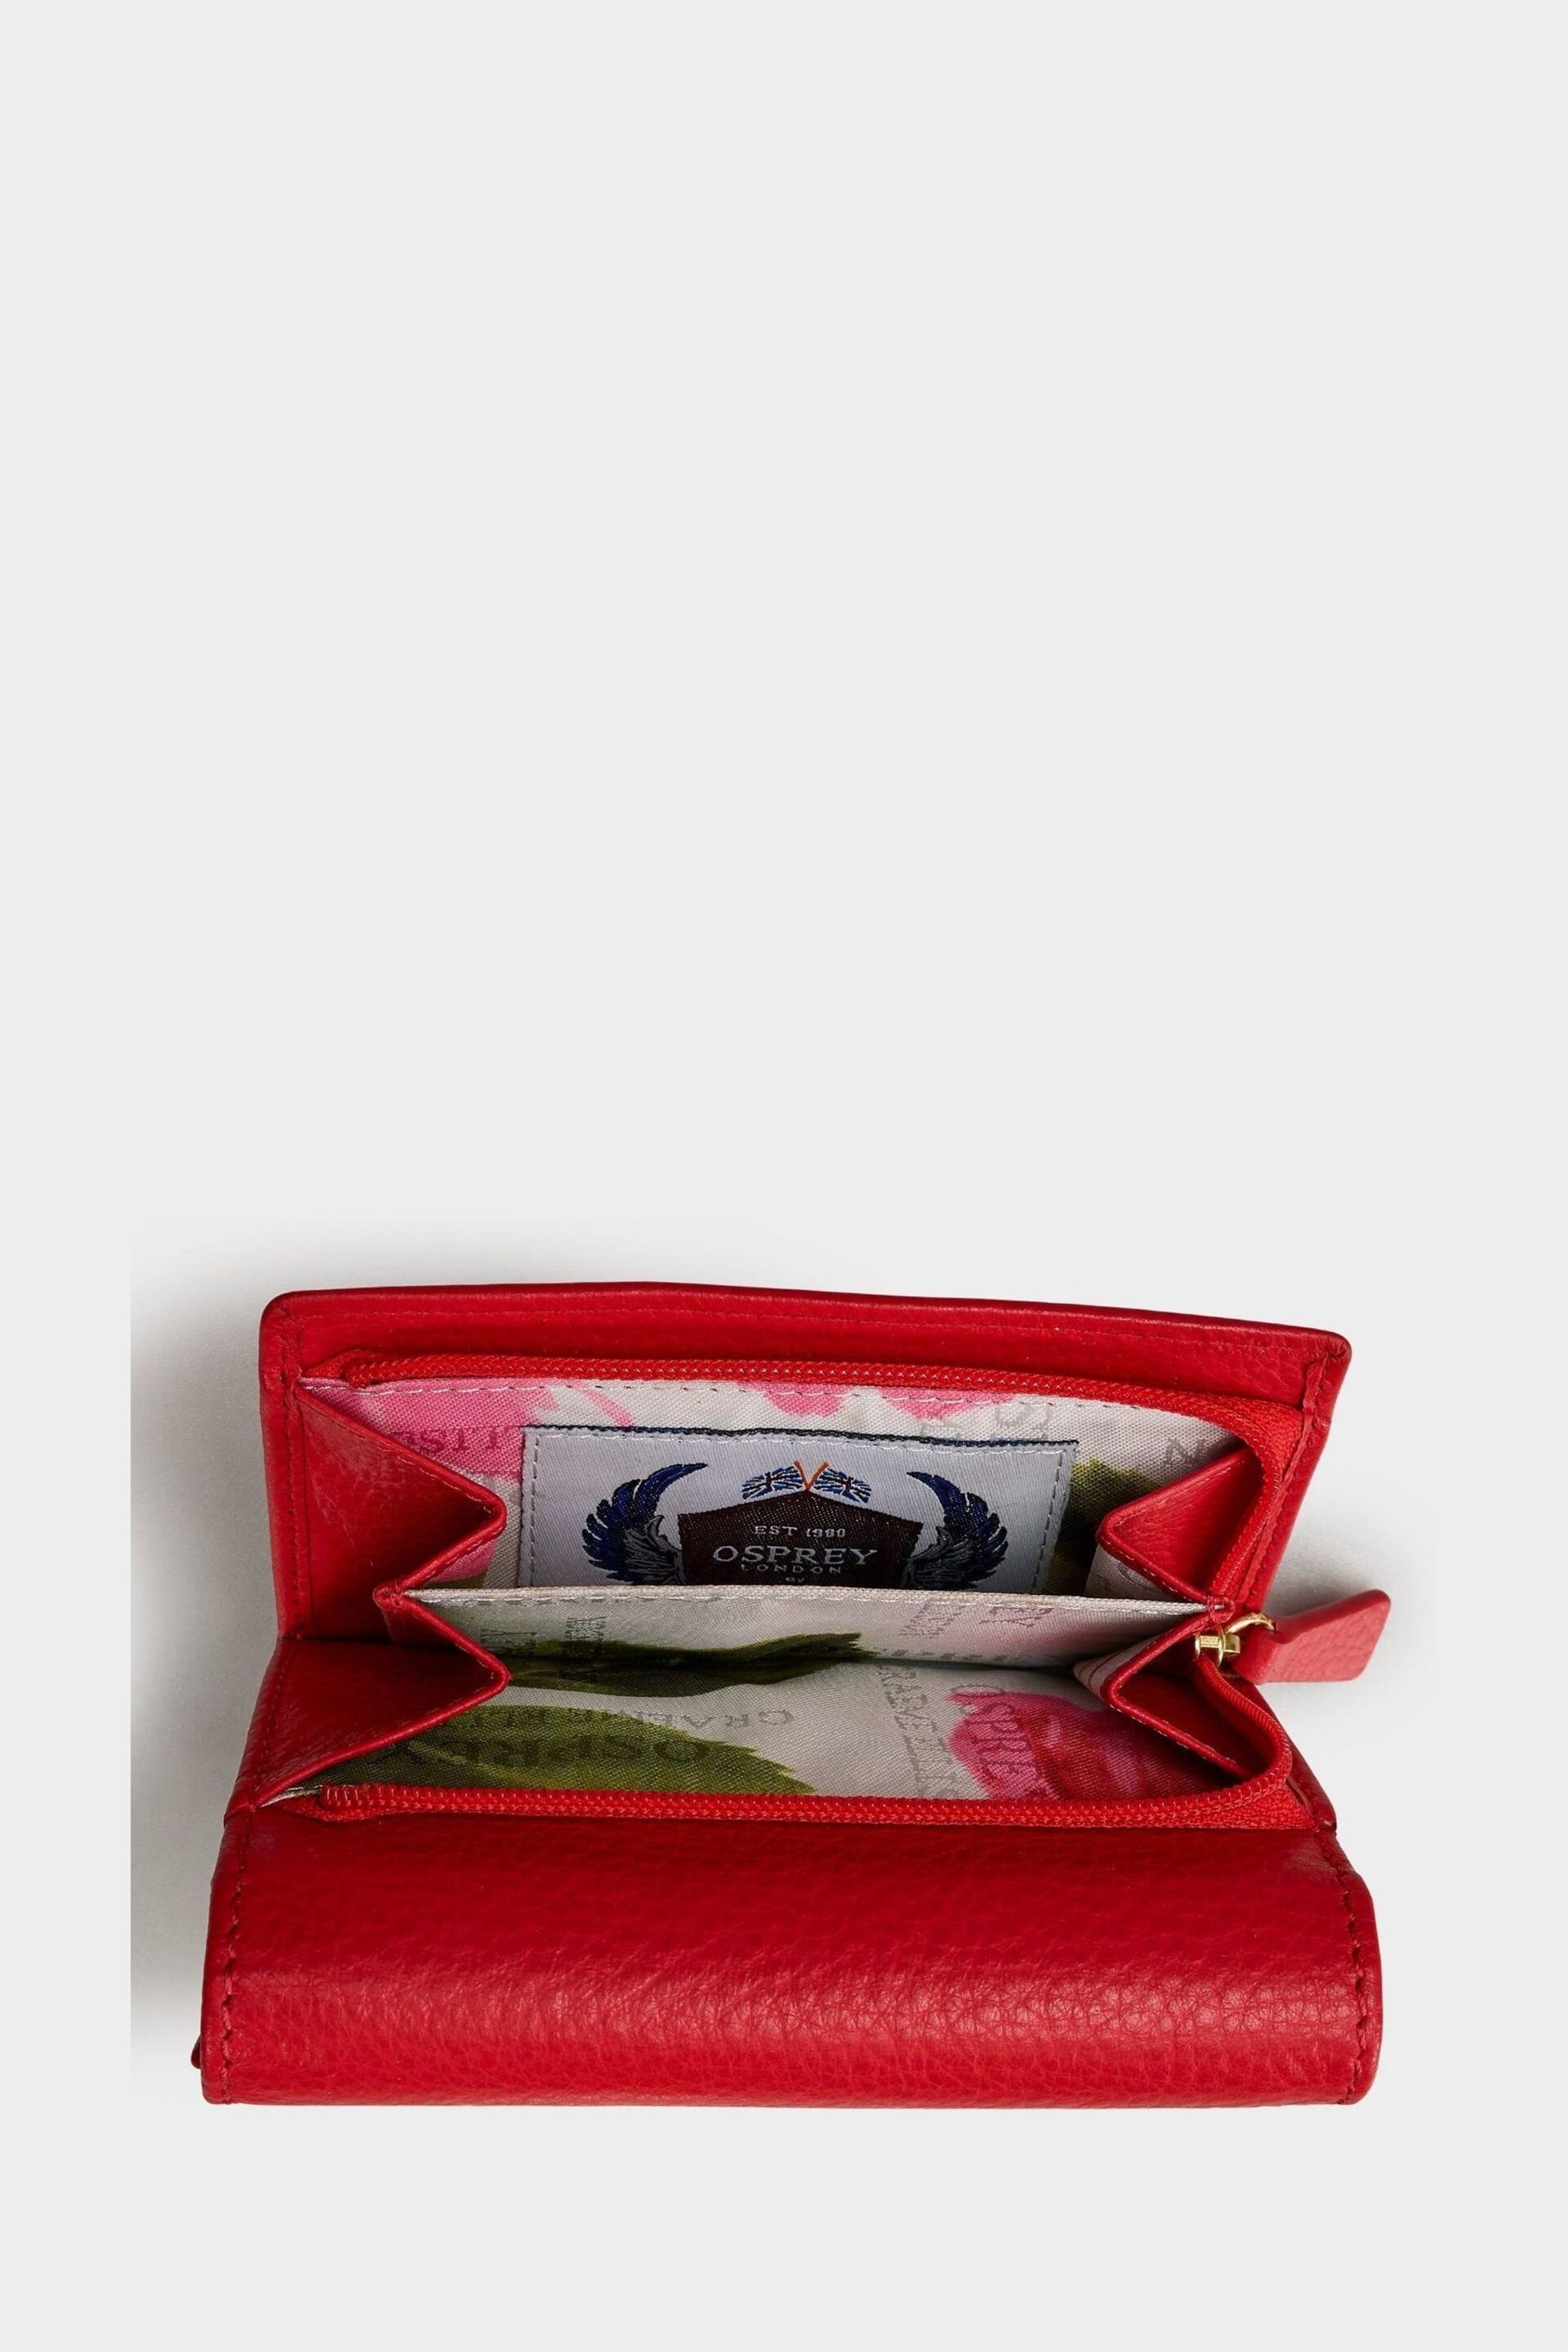 OSPREY LONDON The Tilly Leather Purse Gift Set - Image 5 of 8